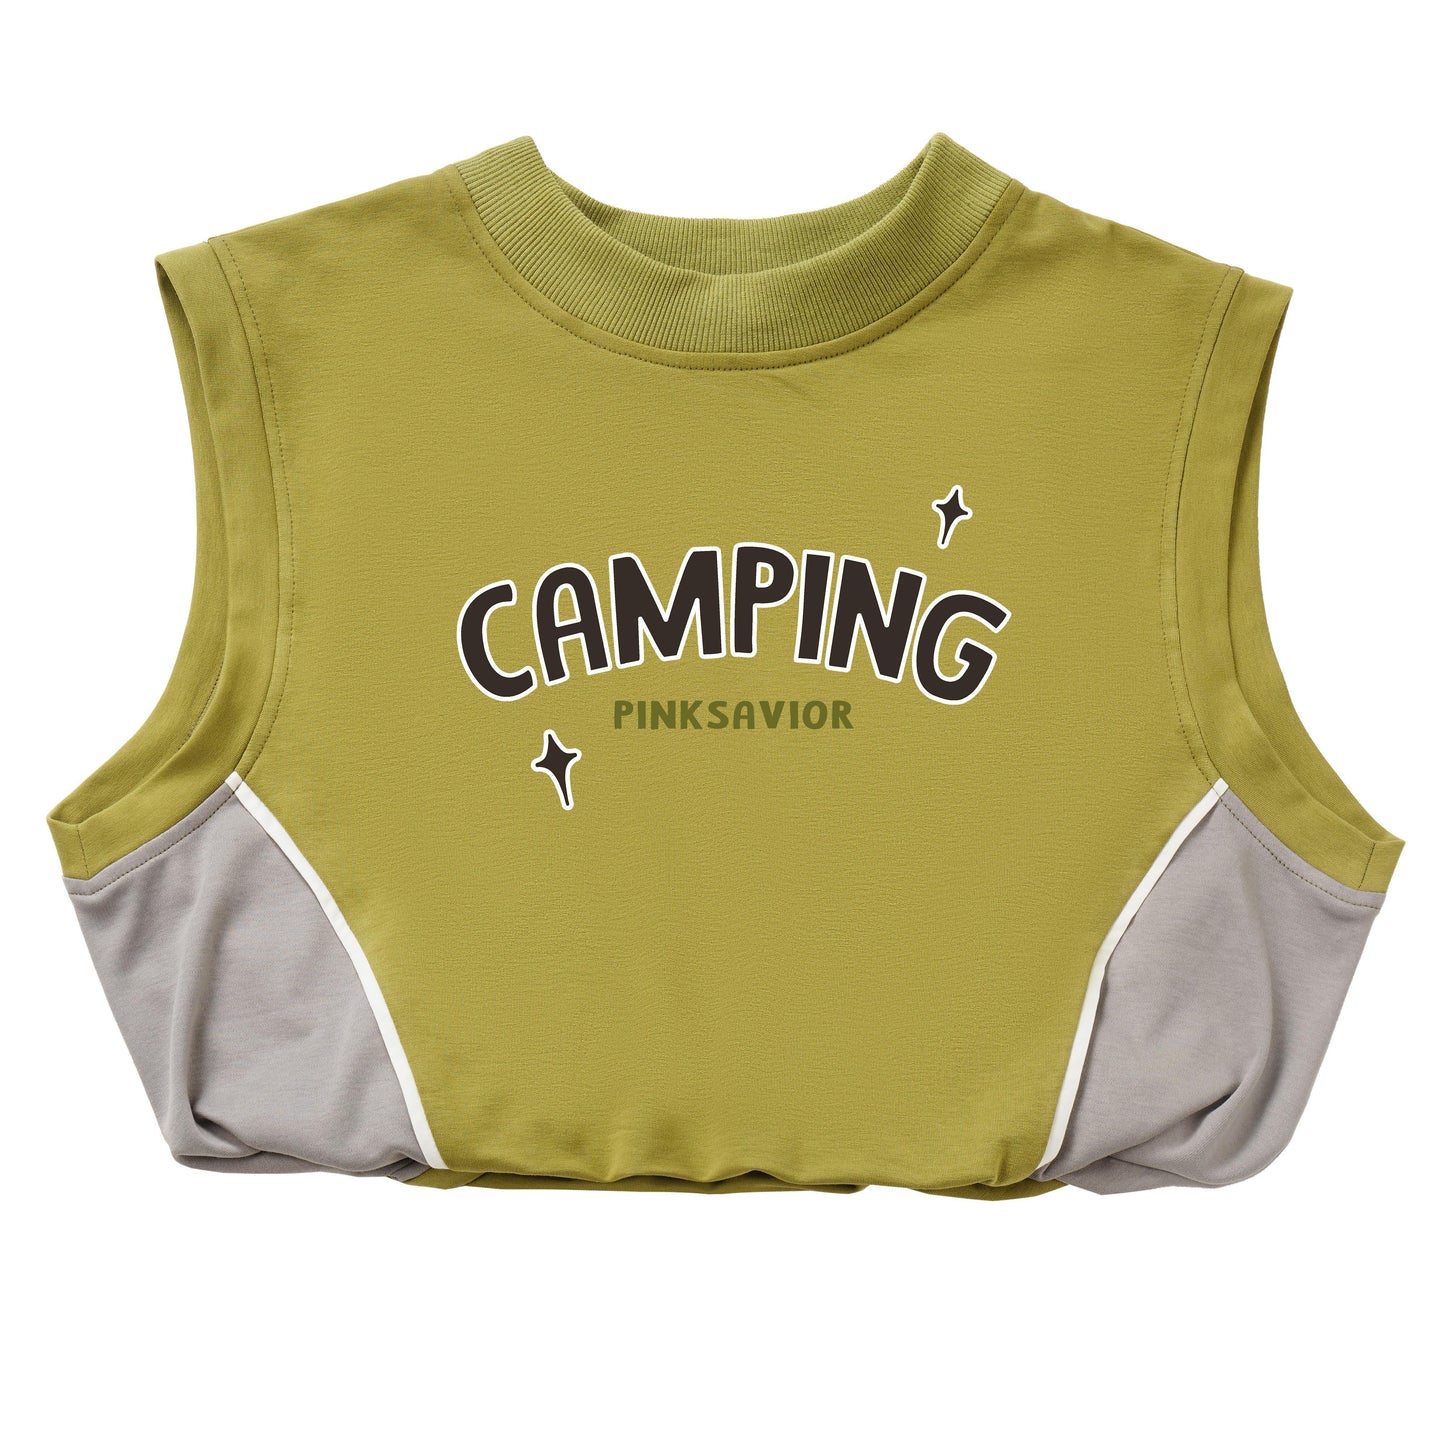 Camp Girl Tops and Bottoms